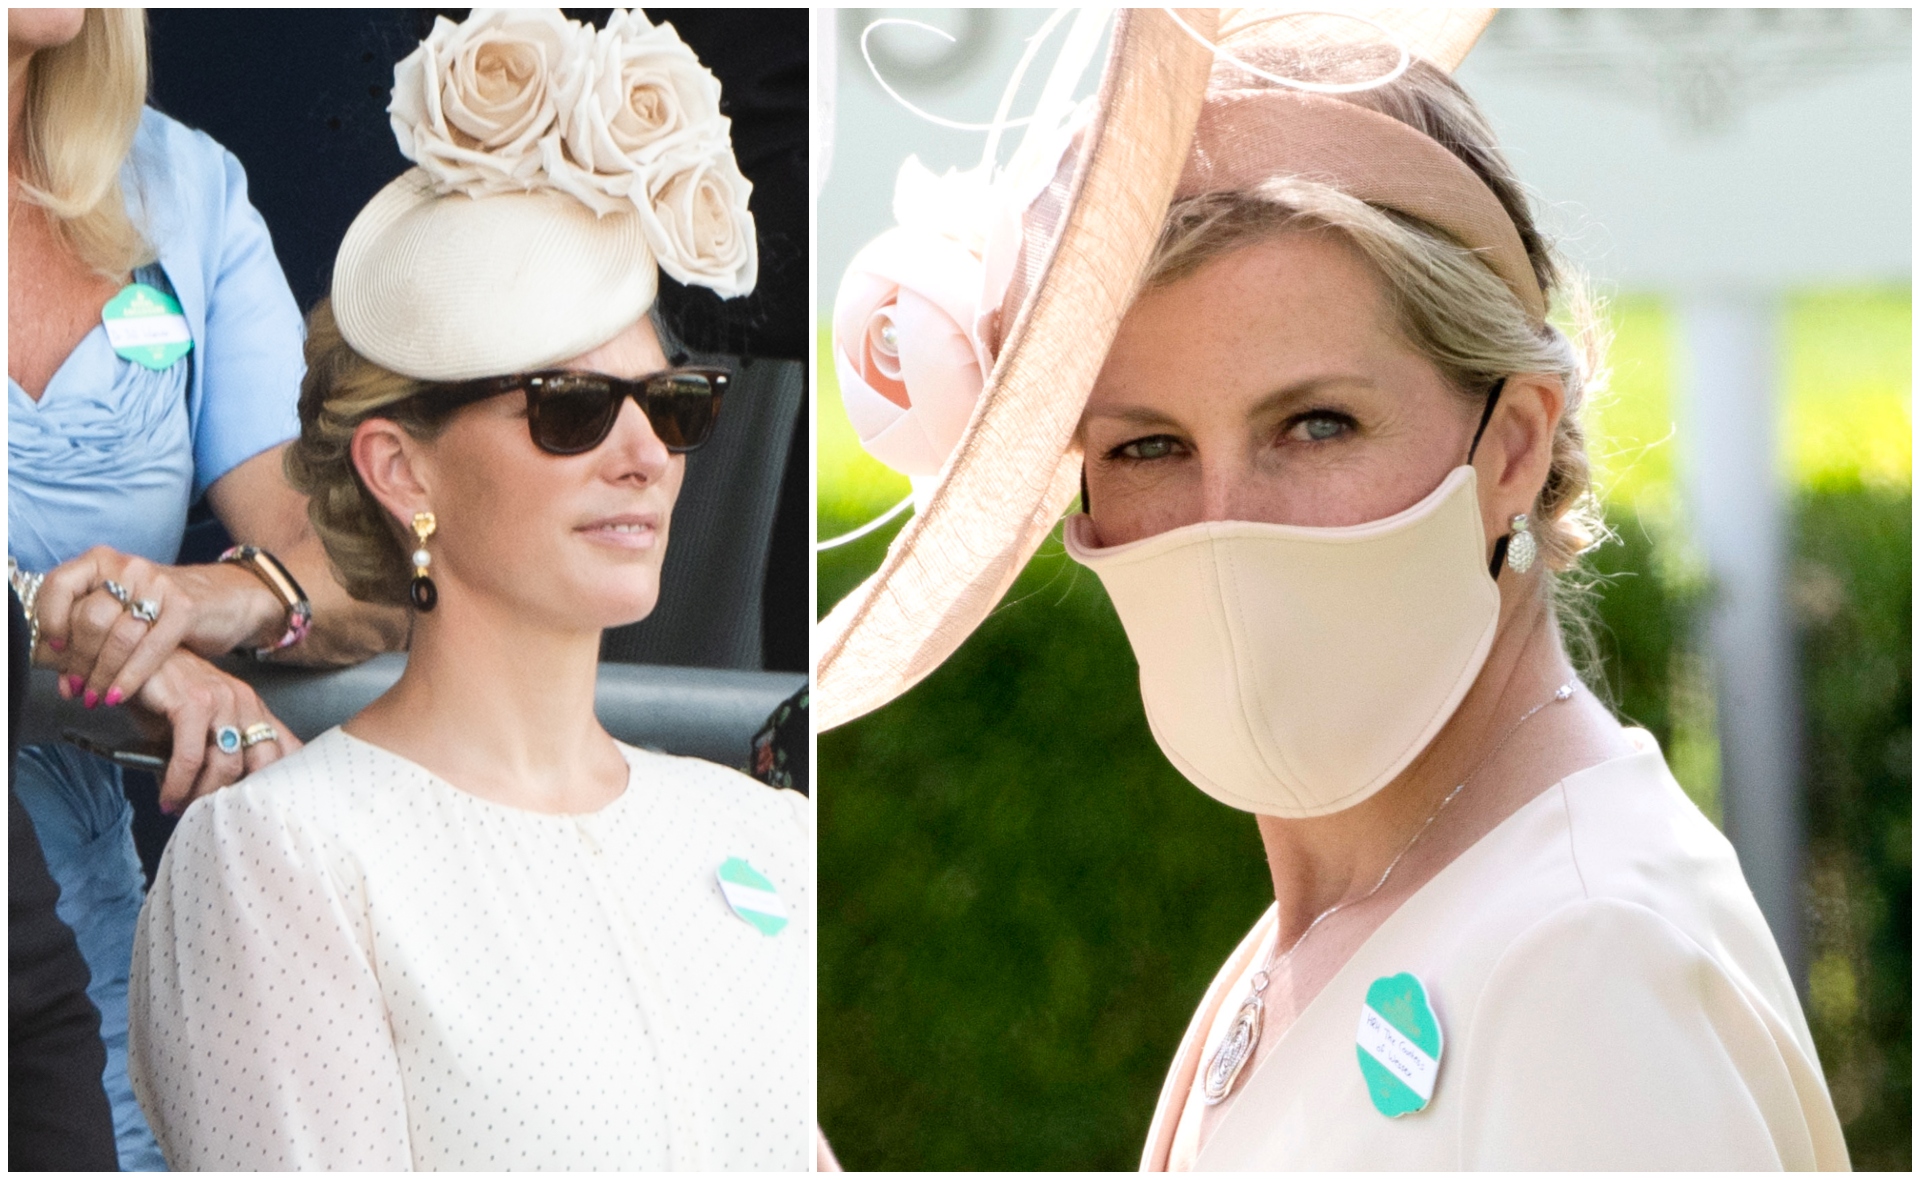 Look sharp! The royals are back with a fashion-forward vengeance at Royal Ascot